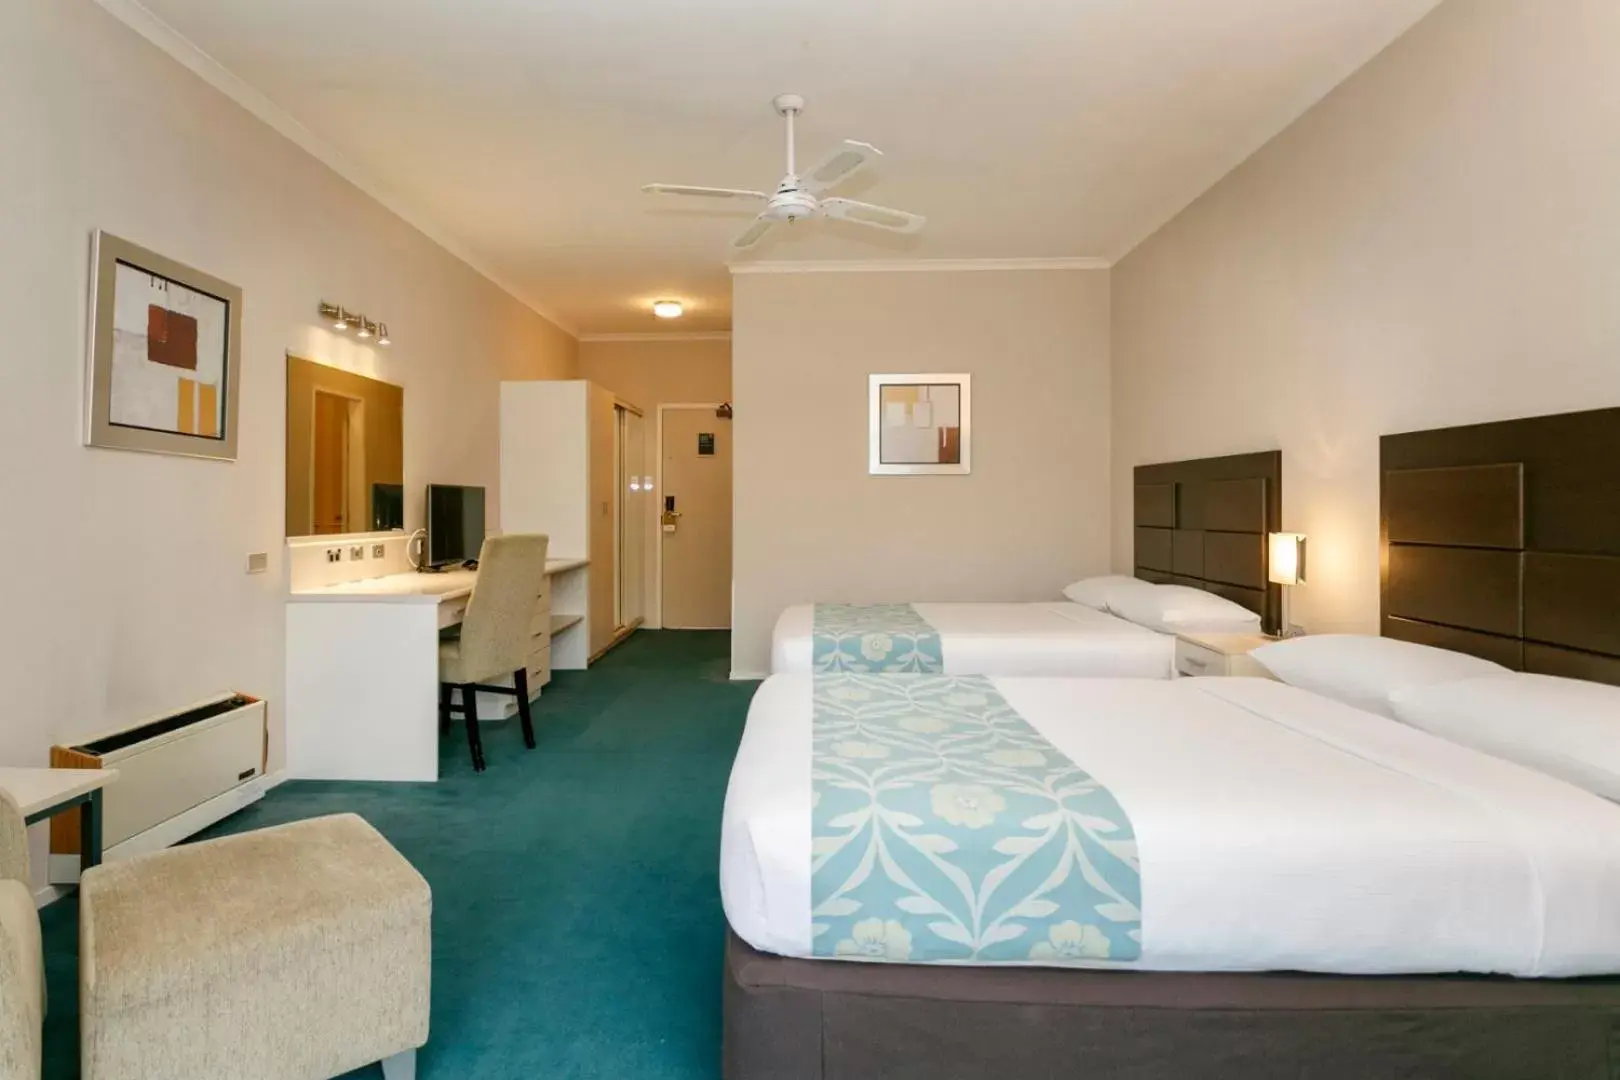 Photo of the whole room in Wairakei Resort Taupo